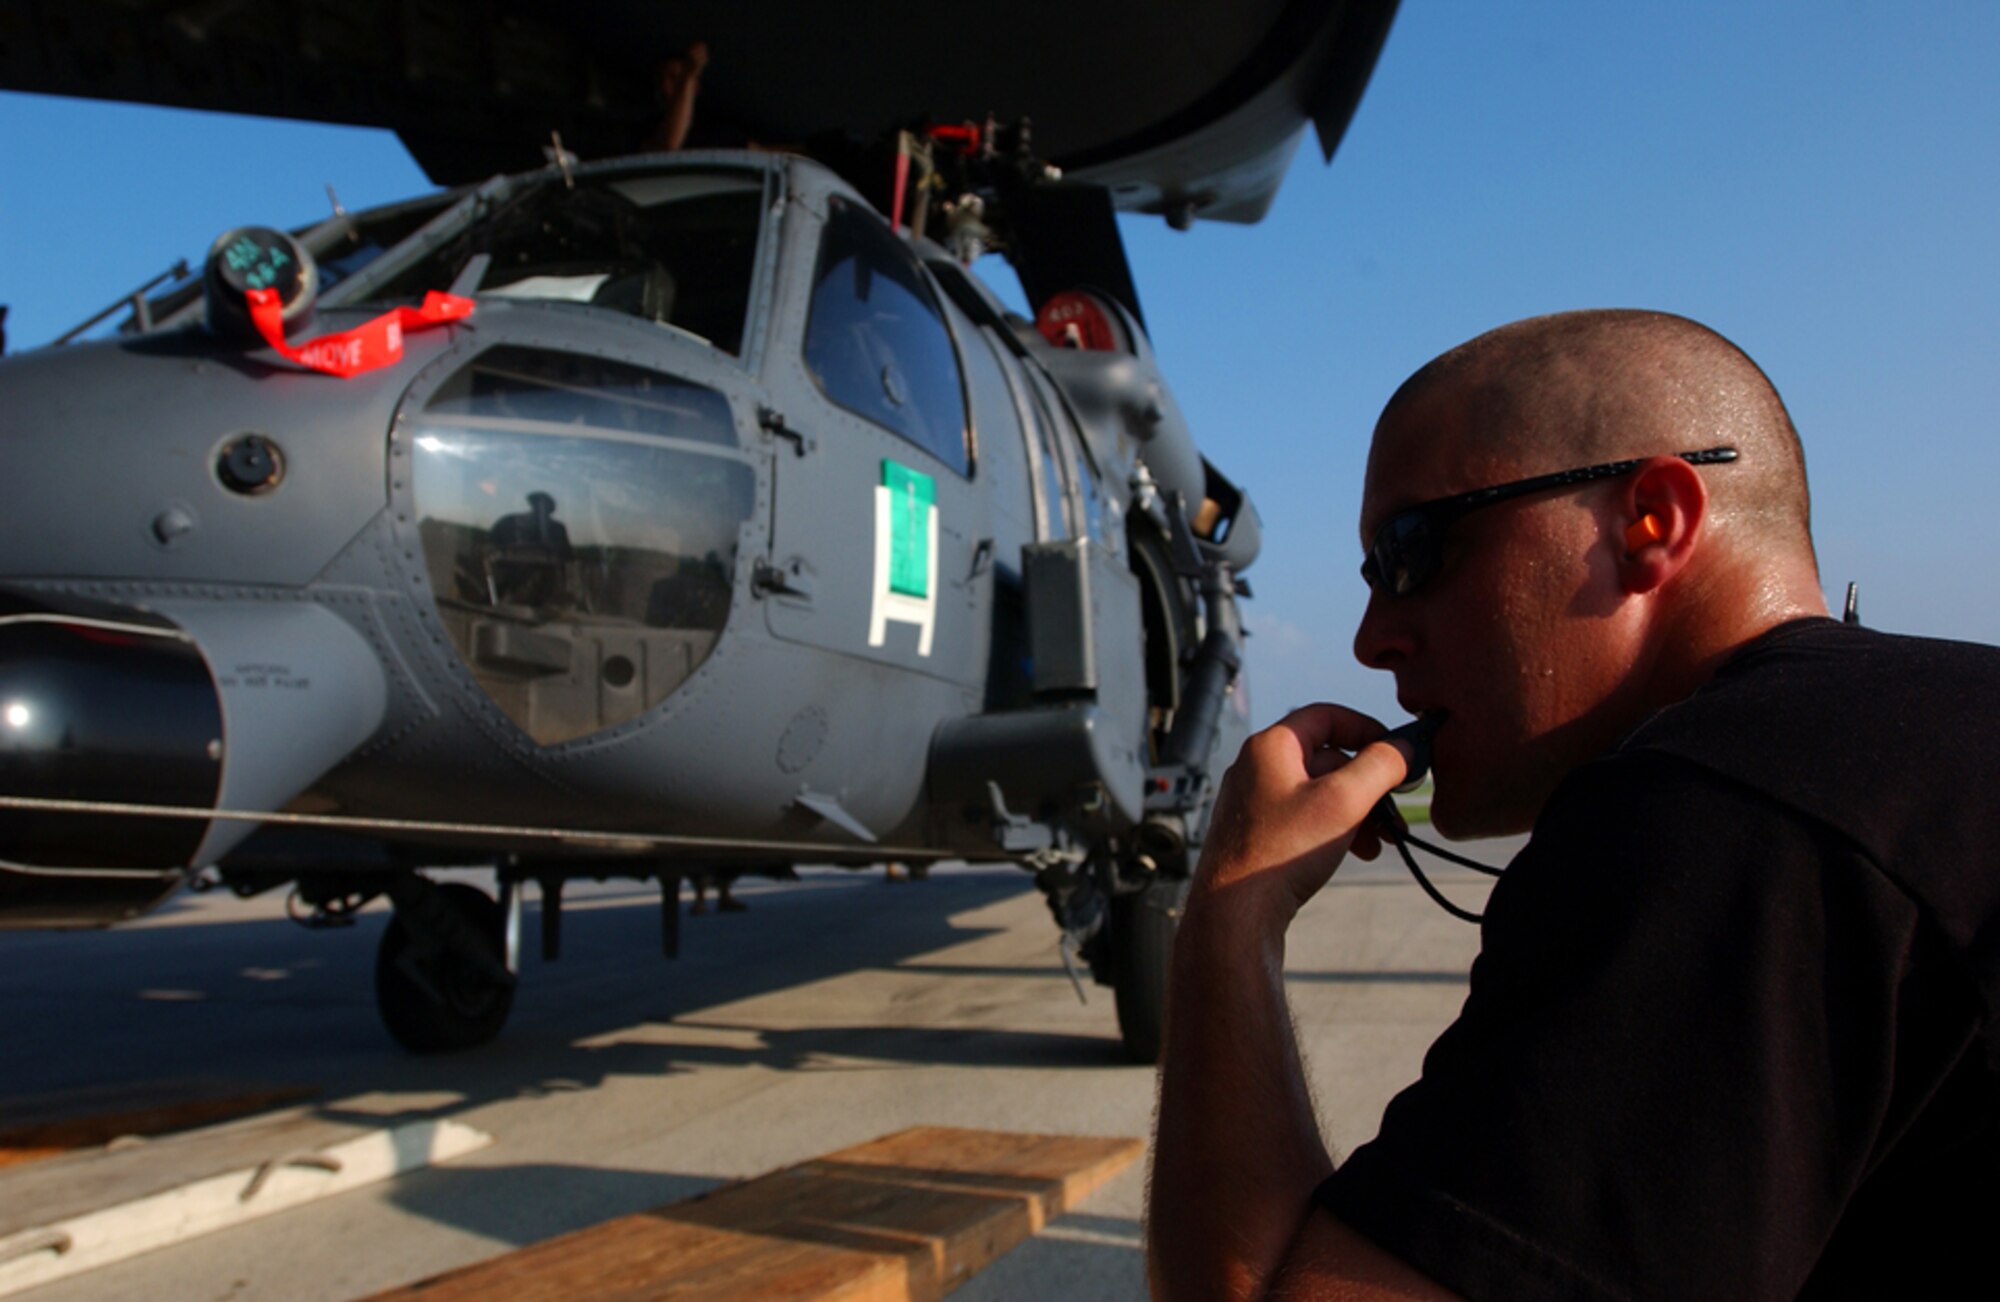 Senior Airman James P. Morin from the 33rd Rescue Squadron, Kadena Air Base, Japan, supervises the loading of an HH-60 Pave Hawk helicopter onto a C-17 GlobeMaster July 30 in preparation for deployment to Kandahar, Afghanistan. This is the second time since January the squadron has deployed to Afghanistan. A group of squadron Airmen returned in May from a 4-month deployment to Kandahar, where this second group will conduct combat search and rescue and medical rescue missions in support of Operation Enduring Freedom. (U.S. Air Force photo/Staff Sgt. Reynaldo Ramon)